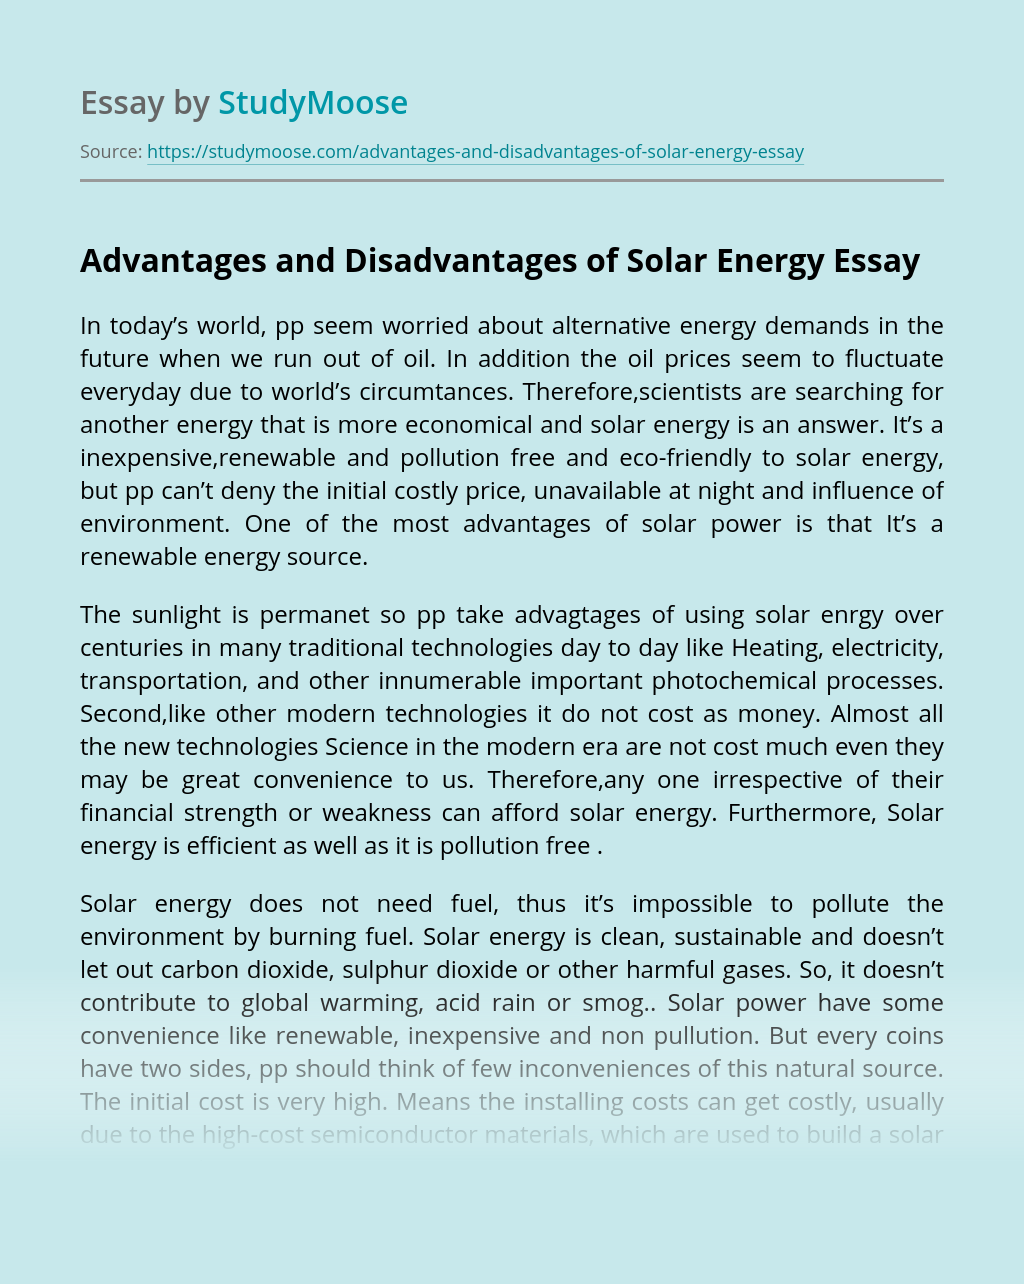 What are 10 disadvantages of solar energy?